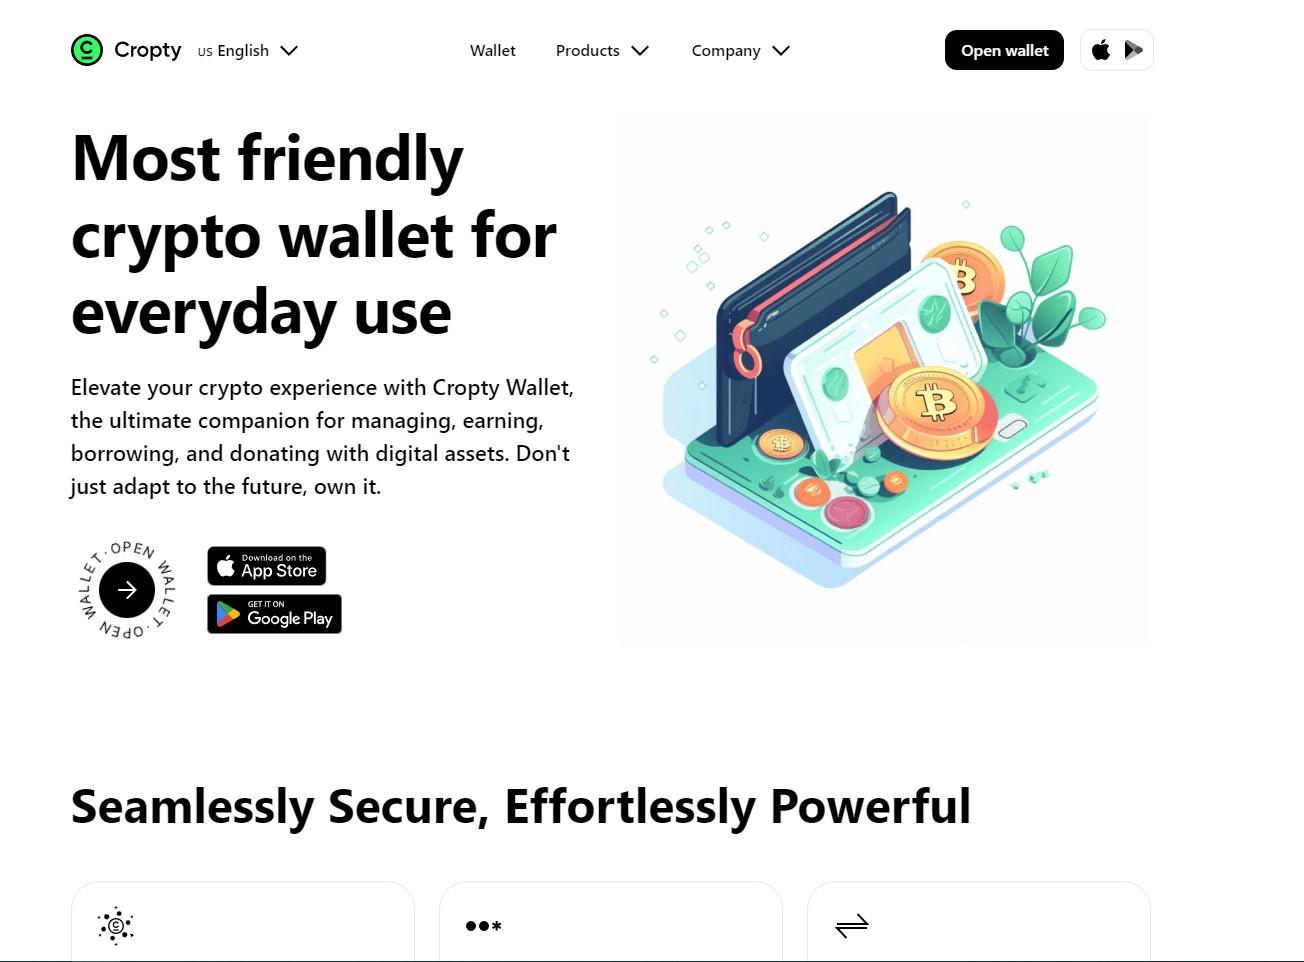 Cropty Wallet: Ensuring Security, Speed, Convenience, Privacy, and 24/7 Support